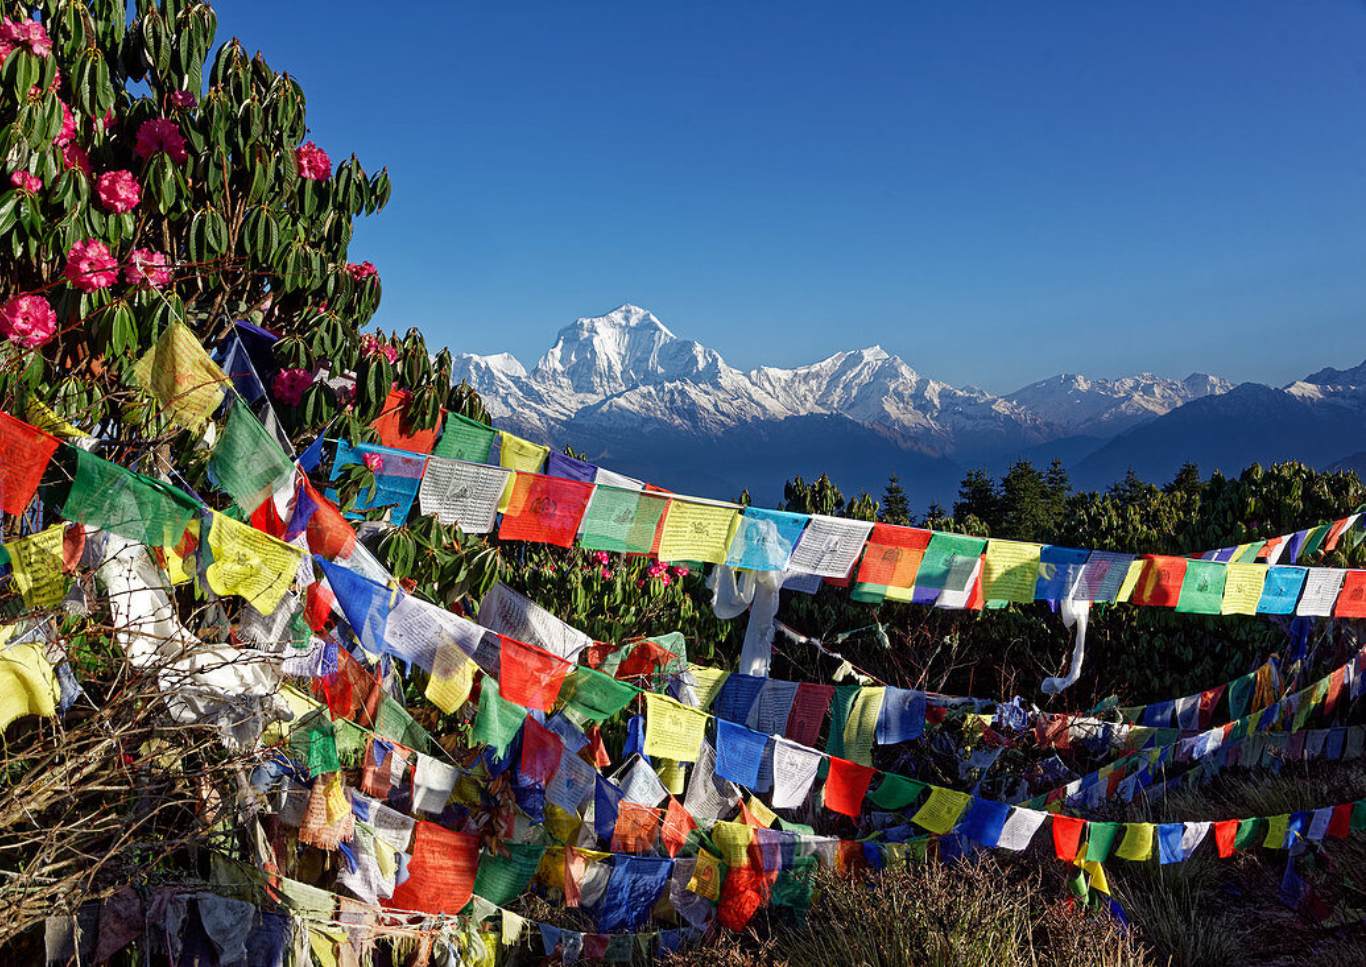 Prayer flags in the Himalayas